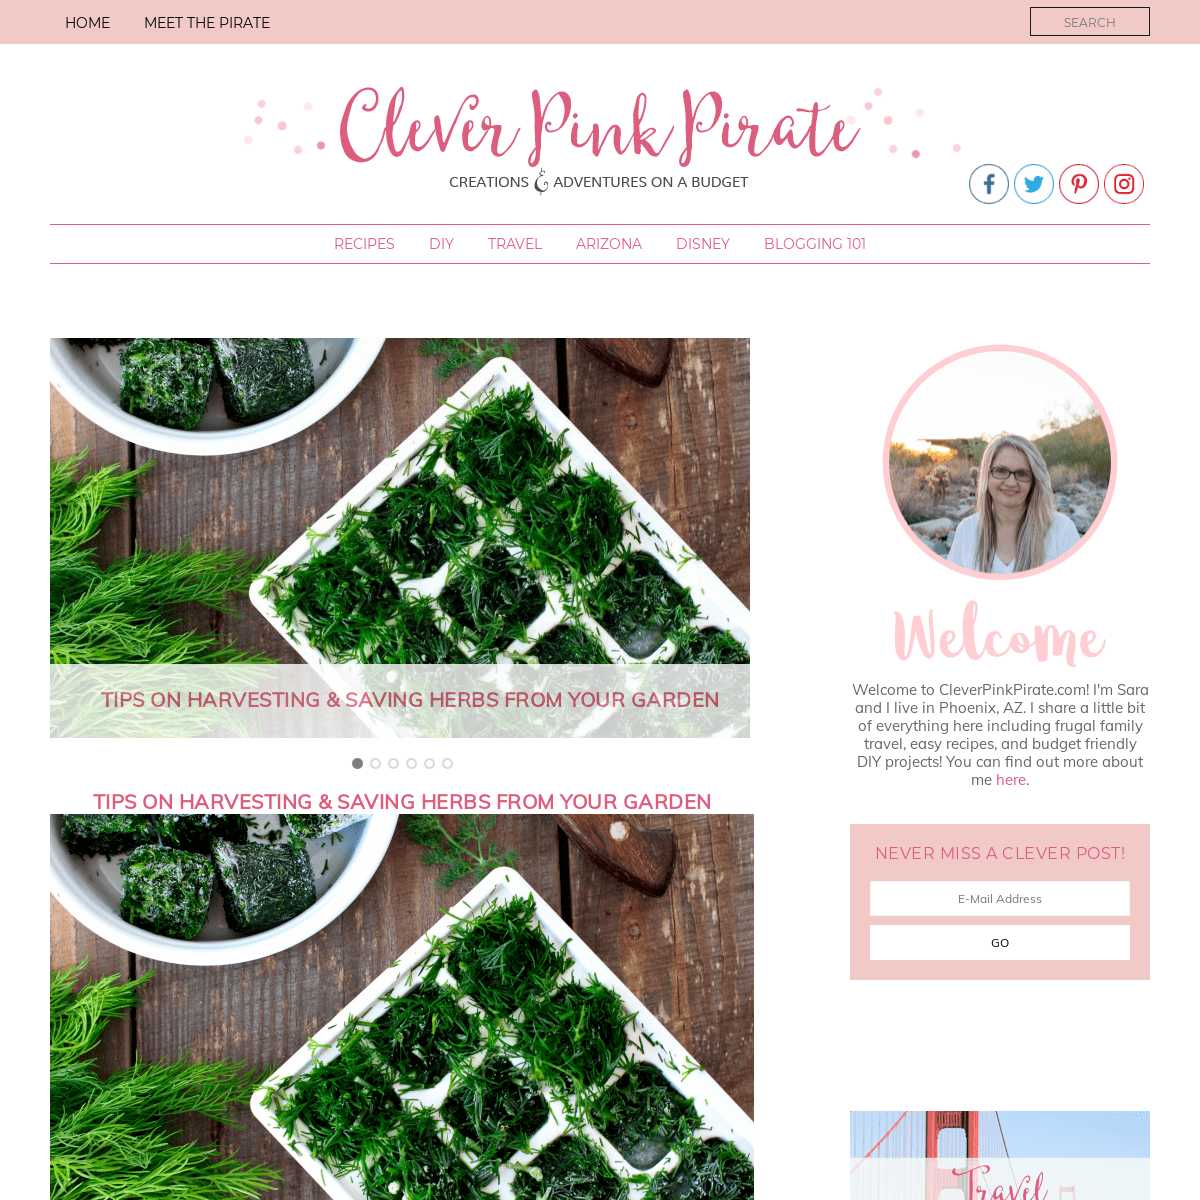 A complete backup of https://cleverpinkpirate.com